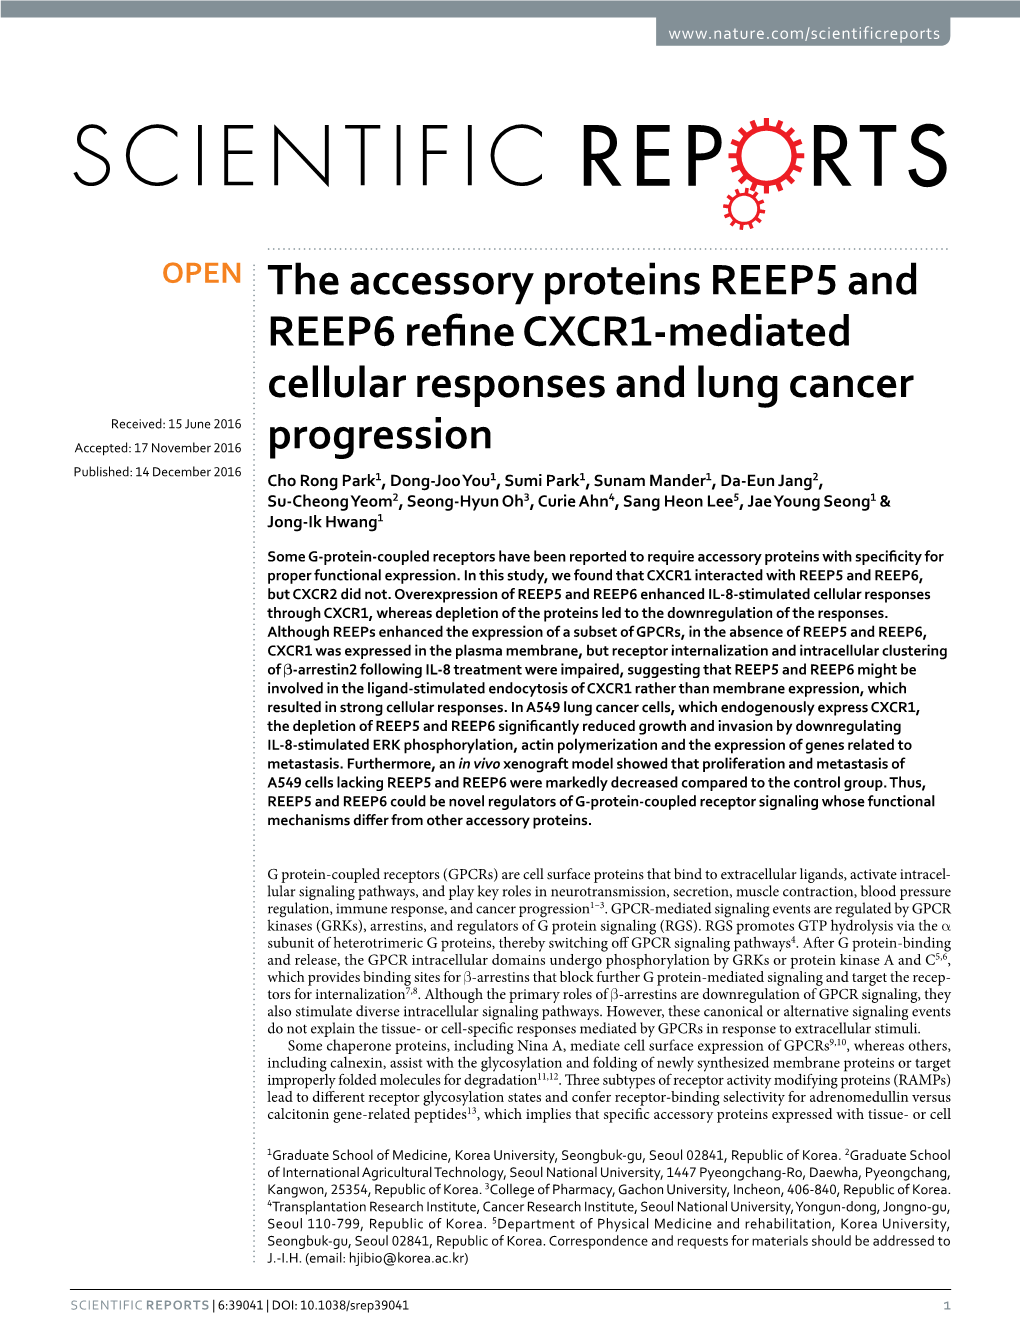 The Accessory Proteins REEP5 and REEP6 Refine CXCR1-Mediated